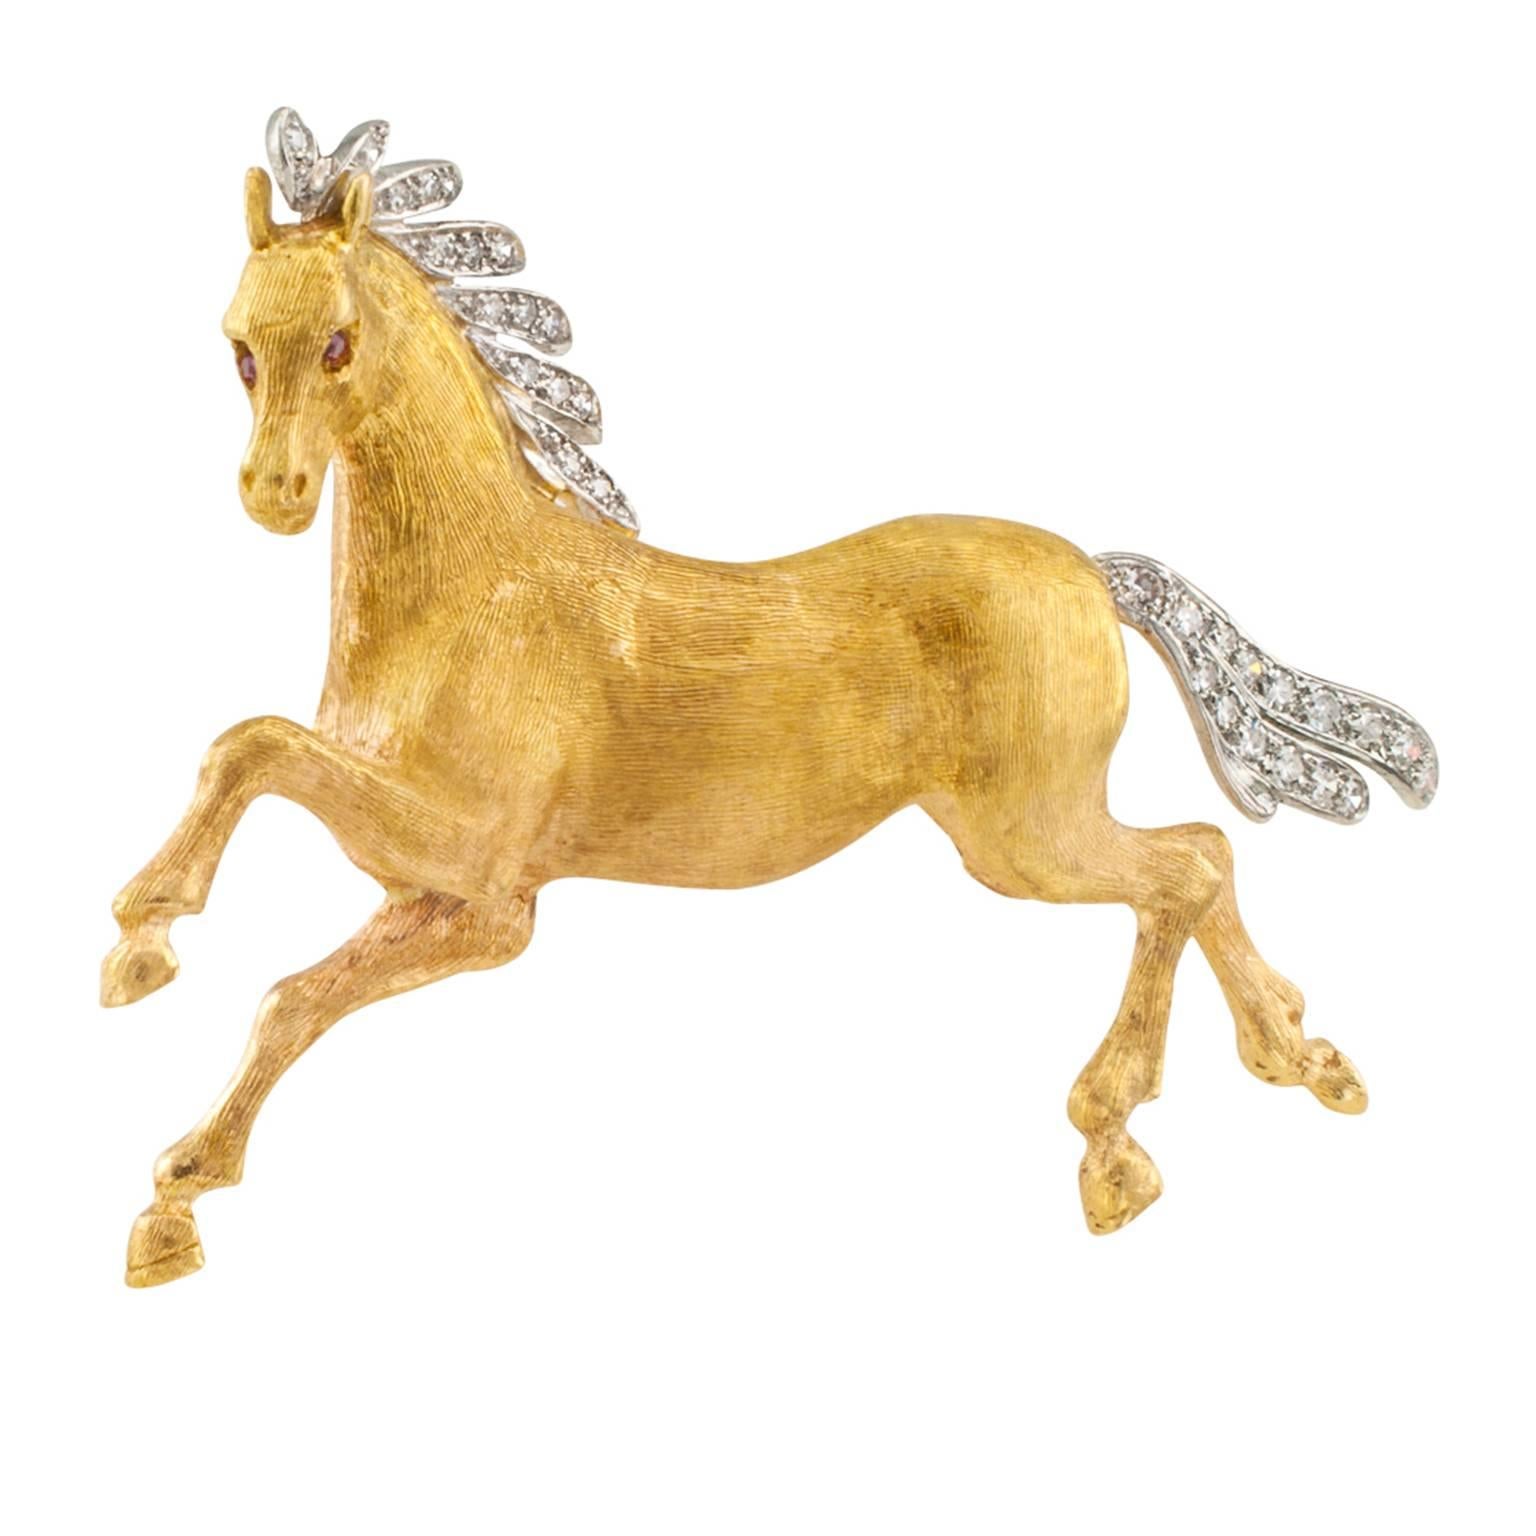 Wild Mustang Horse Brooch

A spirited wild mustang 18 karat yellow gold brooch masterfully hand-Florentined, with ruby-set eyes, platinum  flowing mane and tail set with thirty-one diamonds totaling approximately 0.40 carat, approximately G color